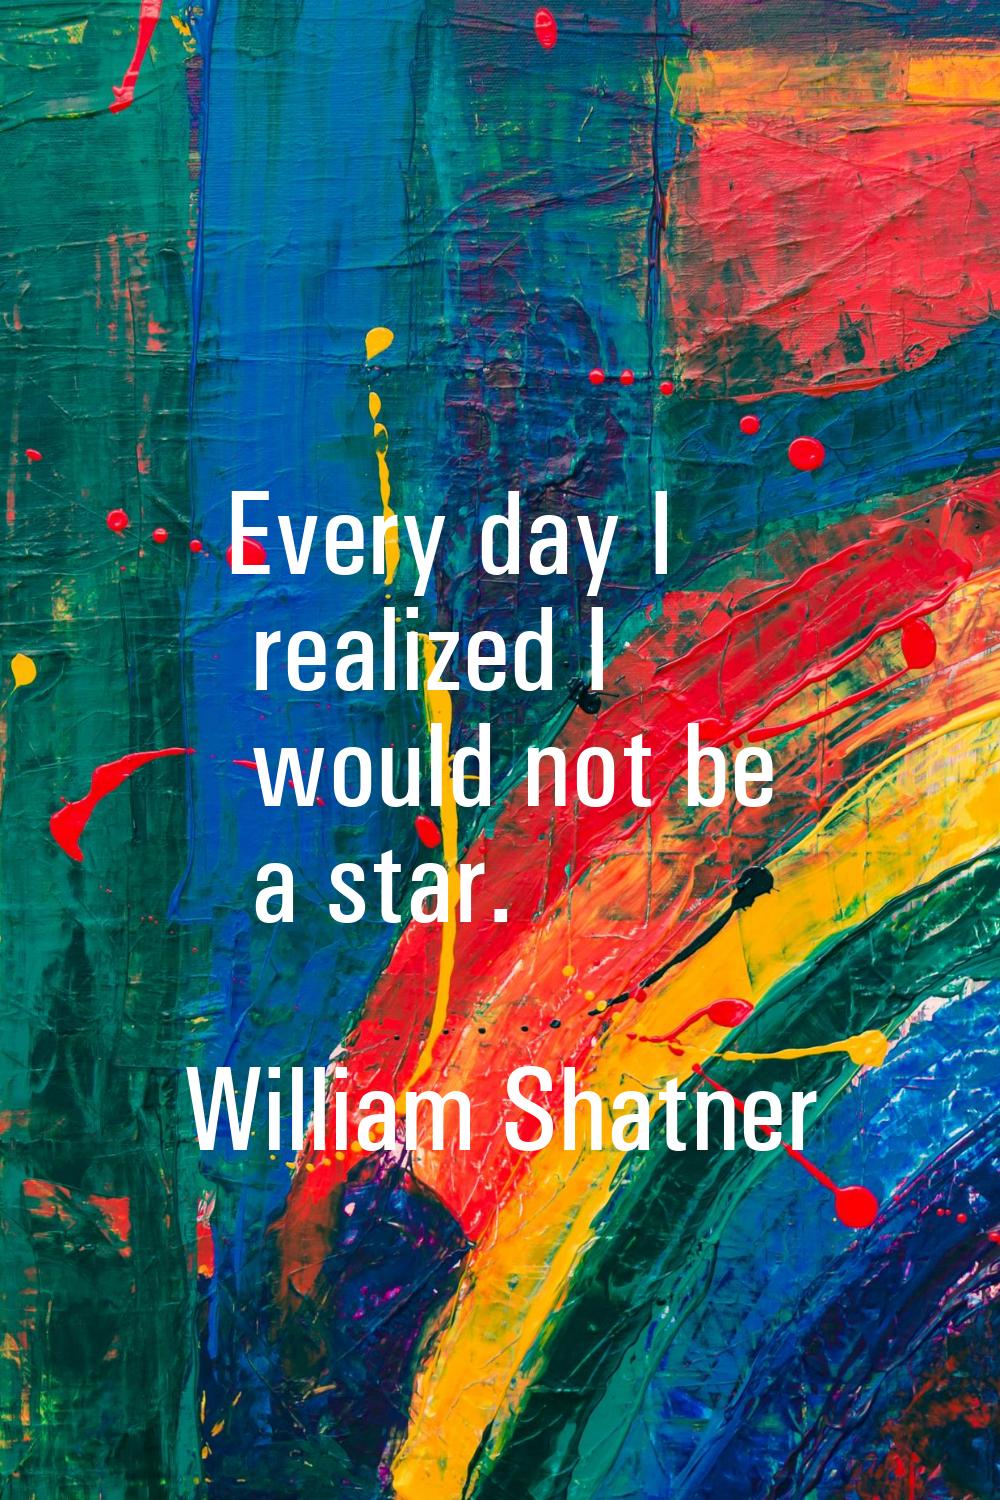 Every day I realized I would not be a star.